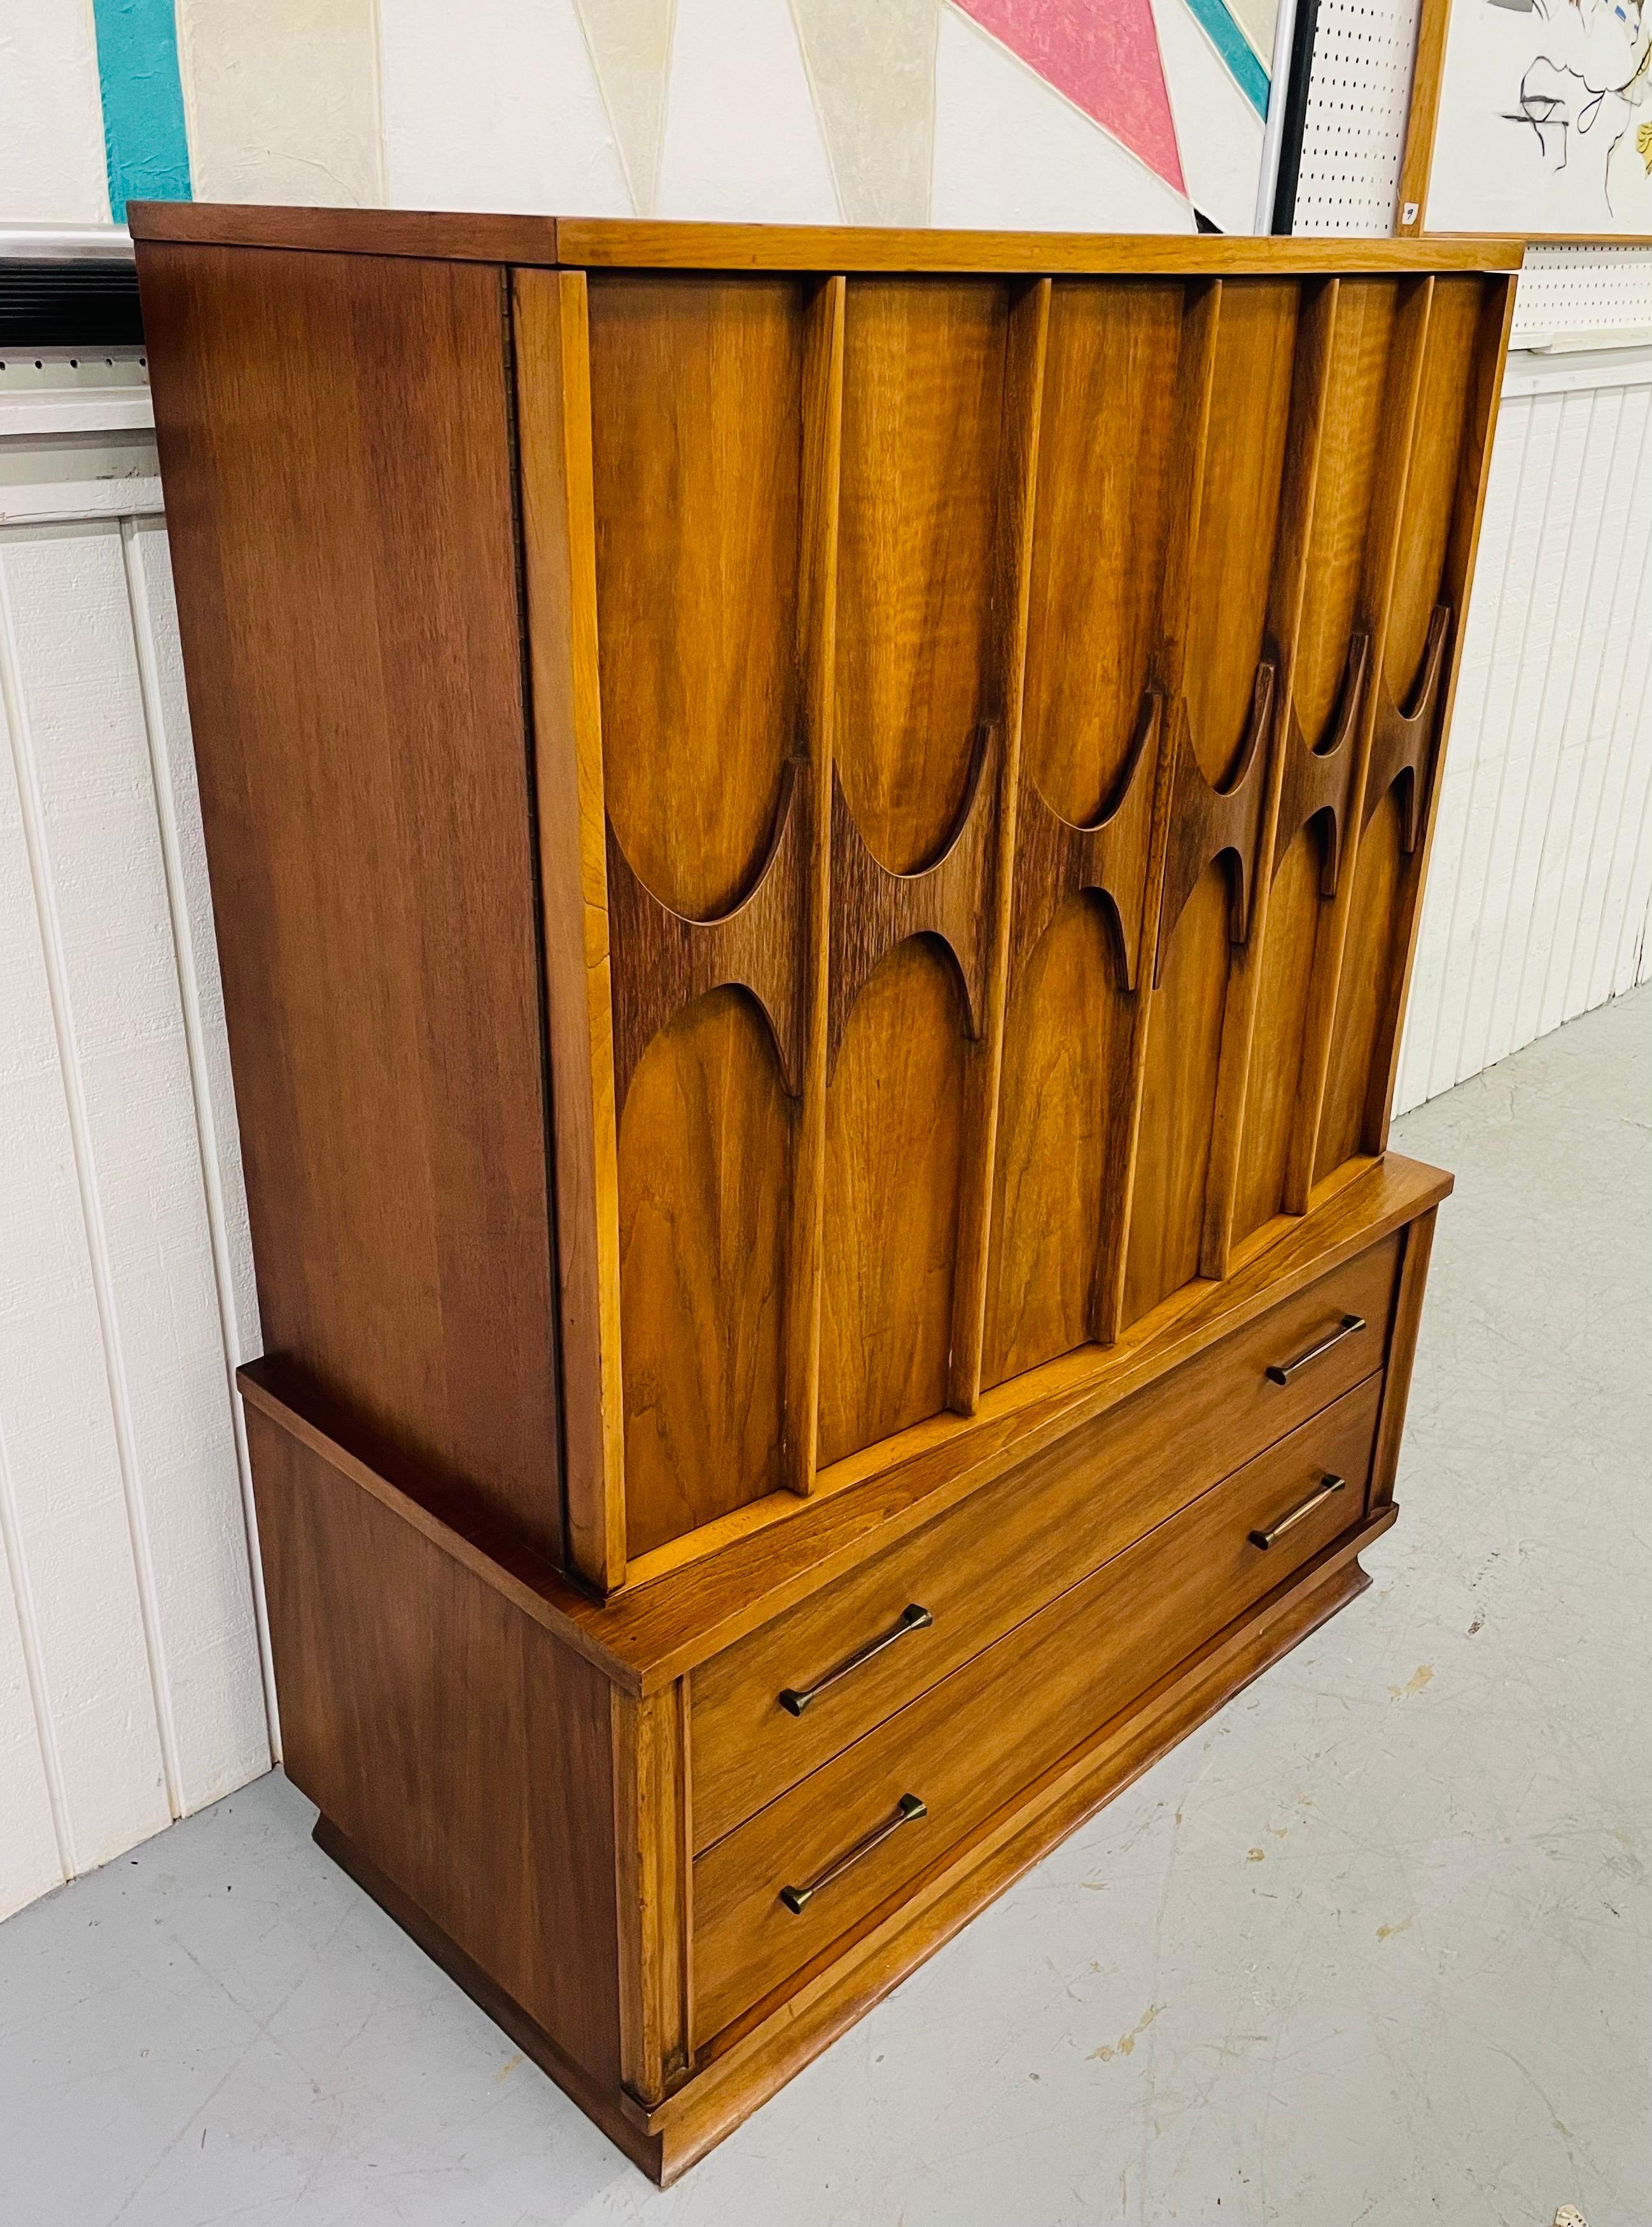 This listing is for a Mid-Century Kent Coffey Perspecta walnut dresser. Featuring two doors that open up to three drawers, two drawers will original pulls at the bottom, and a walnut finish.